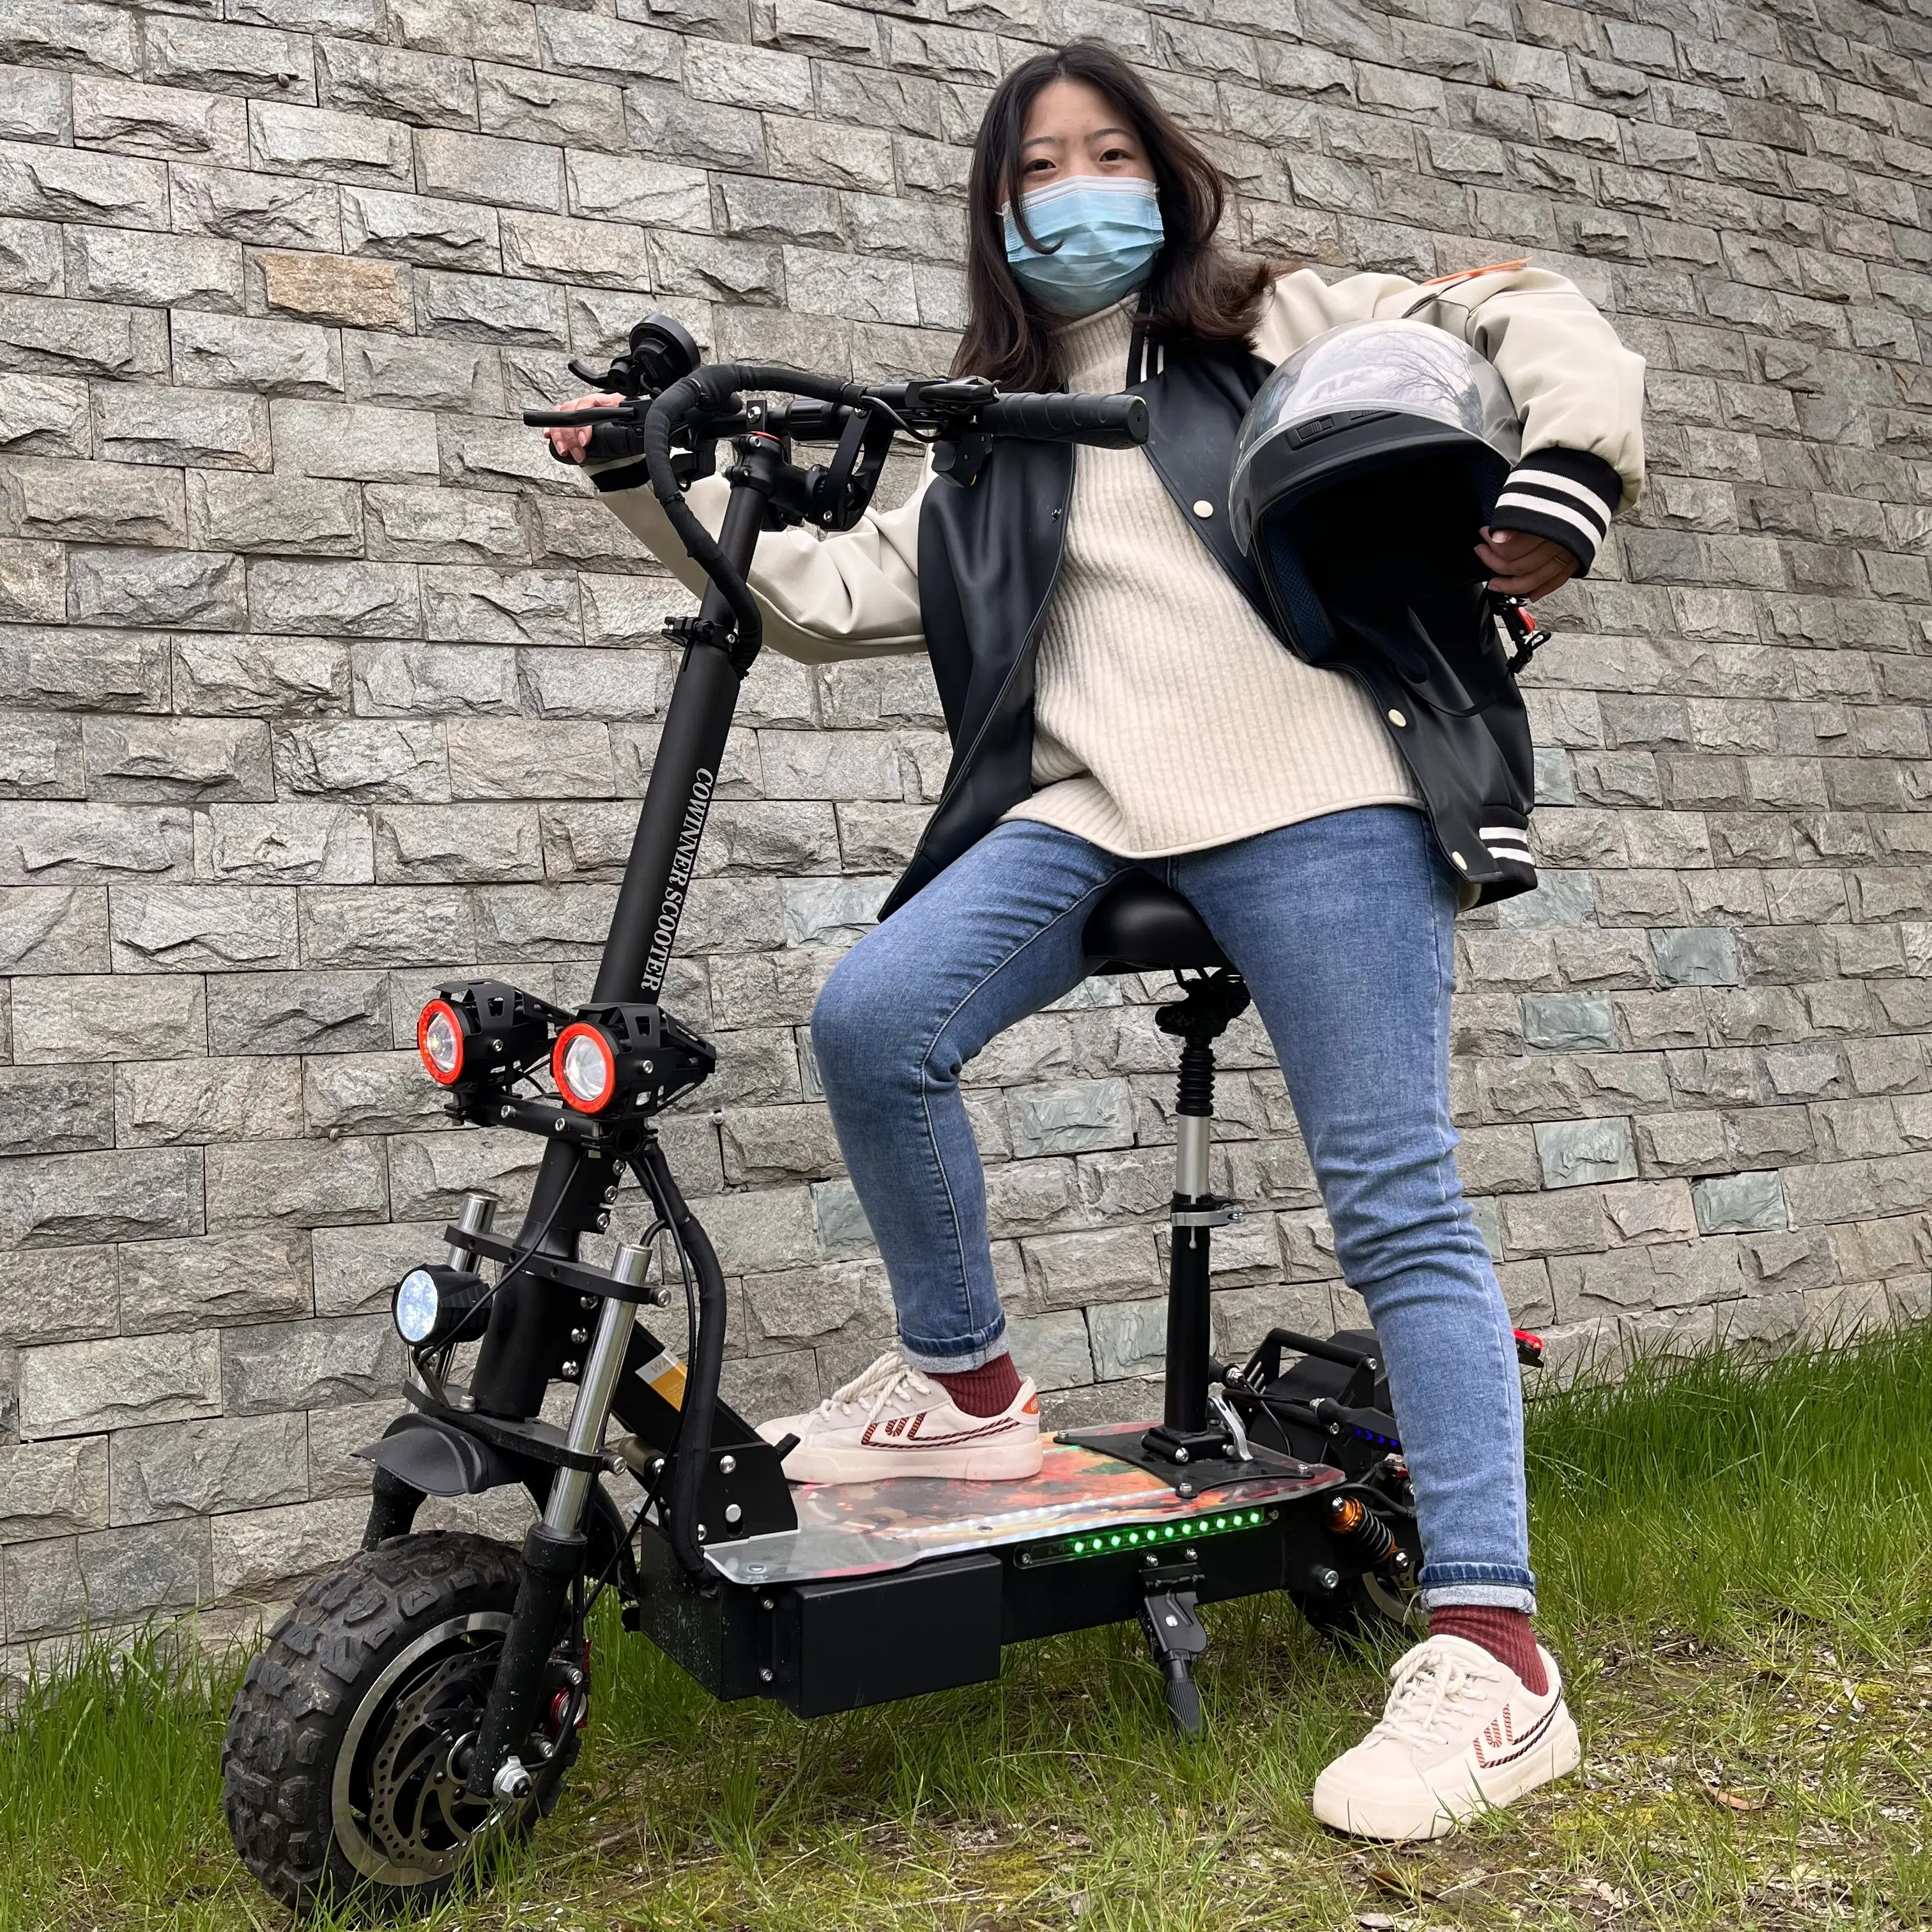 

Hot sale eu warehouse free shipping import from china 60v 5600w 35ah lithuim battery 11inch off road scooter electric for adults